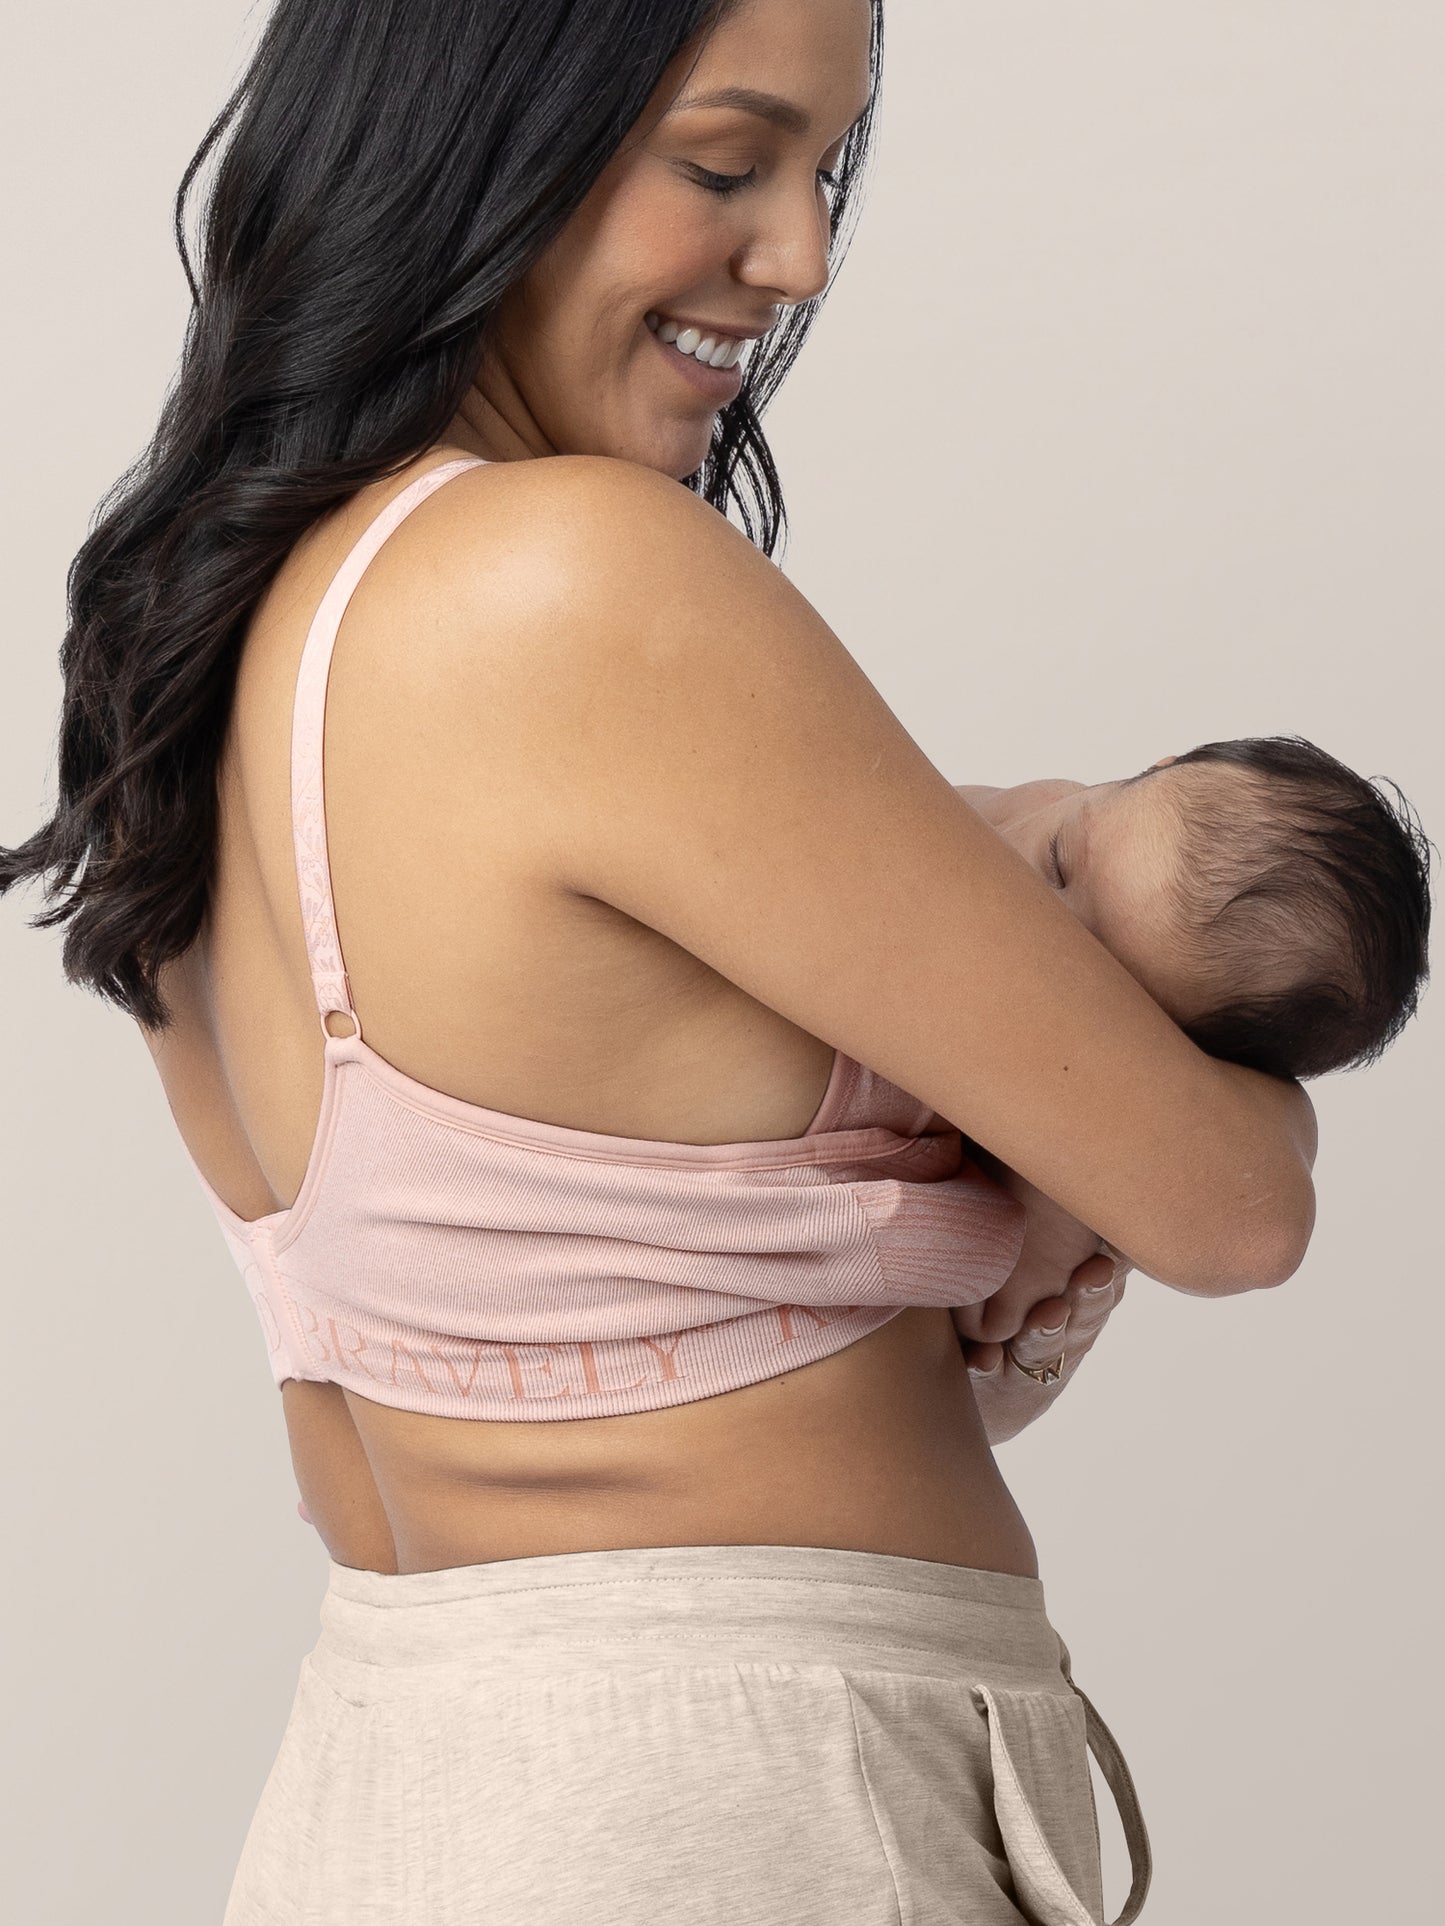 Model breastfeeding her baby while wearing the Sublime® Hands-Free Pumping & Nursing Bra in Pink Heather